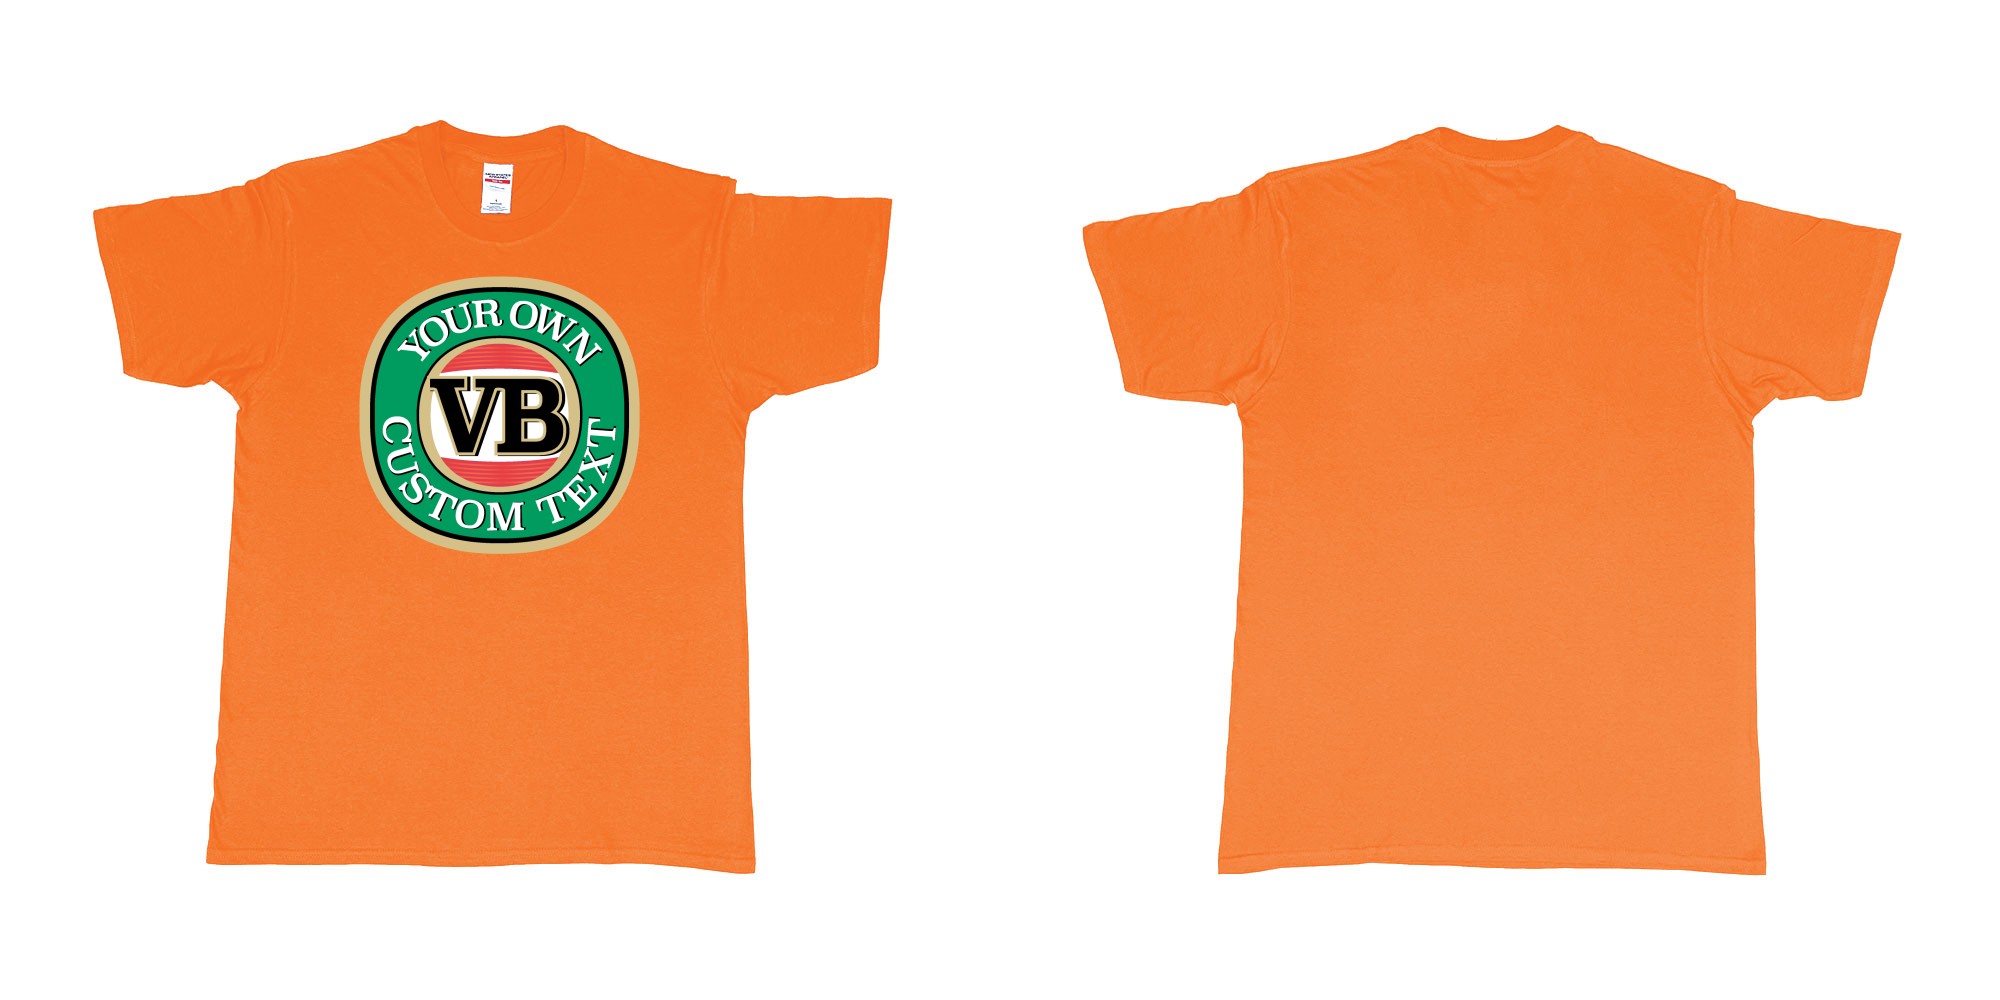 Custom tshirt design vb victoria bitter beer brand logo in fabric color orange choice your own text made in Bali by The Pirate Way